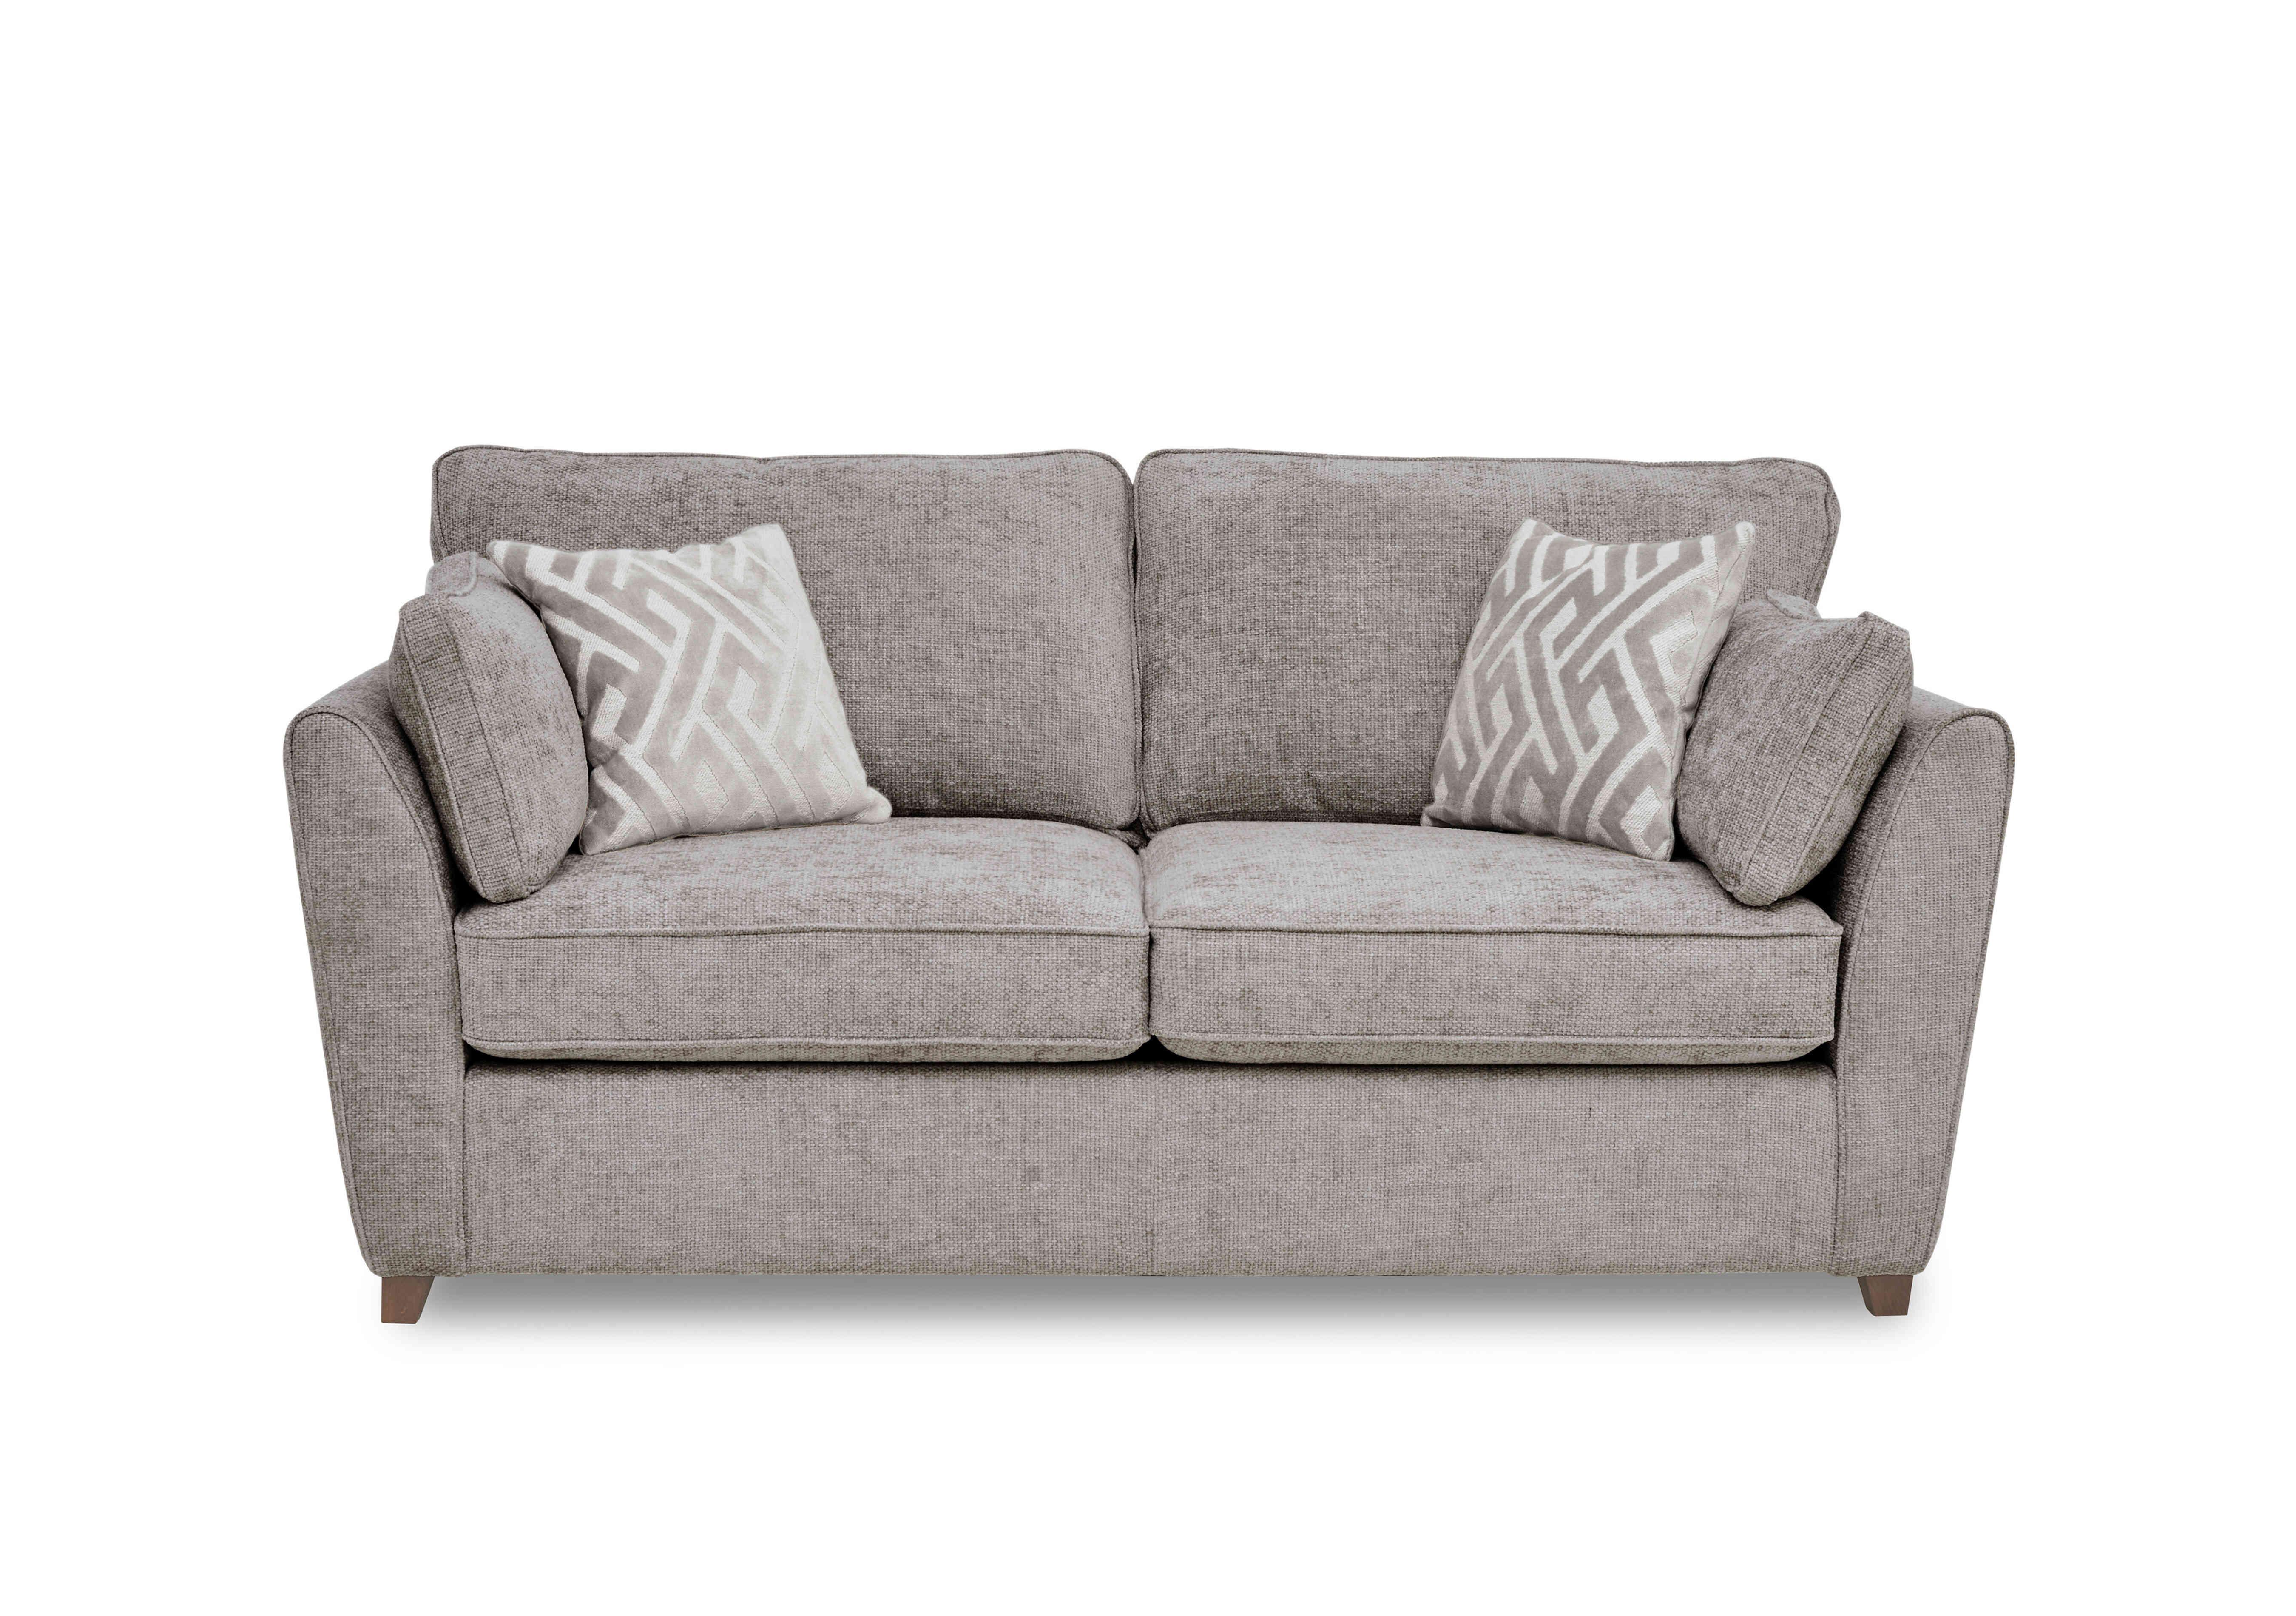 Tabitha 3 Seater Sofa Bed in Ivory on Furniture Village